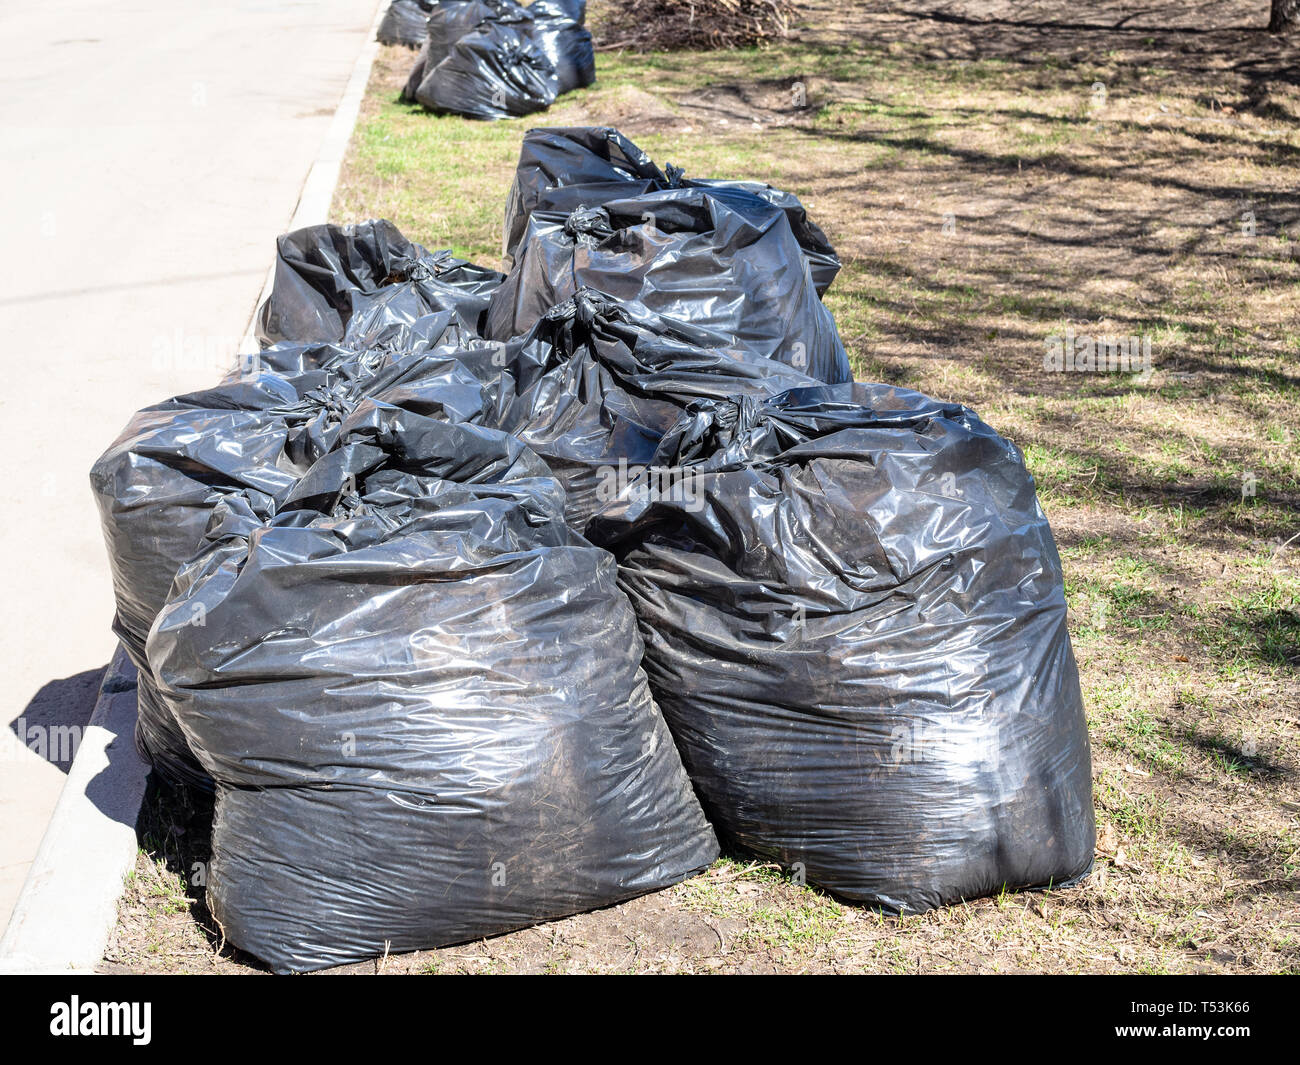 https://c8.alamy.com/comp/T53K66/many-of-trash-bags-filled-with-litter-on-lawn-along-urban-road-in-sunny-spring-day-during-subbotnik-in-moscow-city-T53K66.jpg